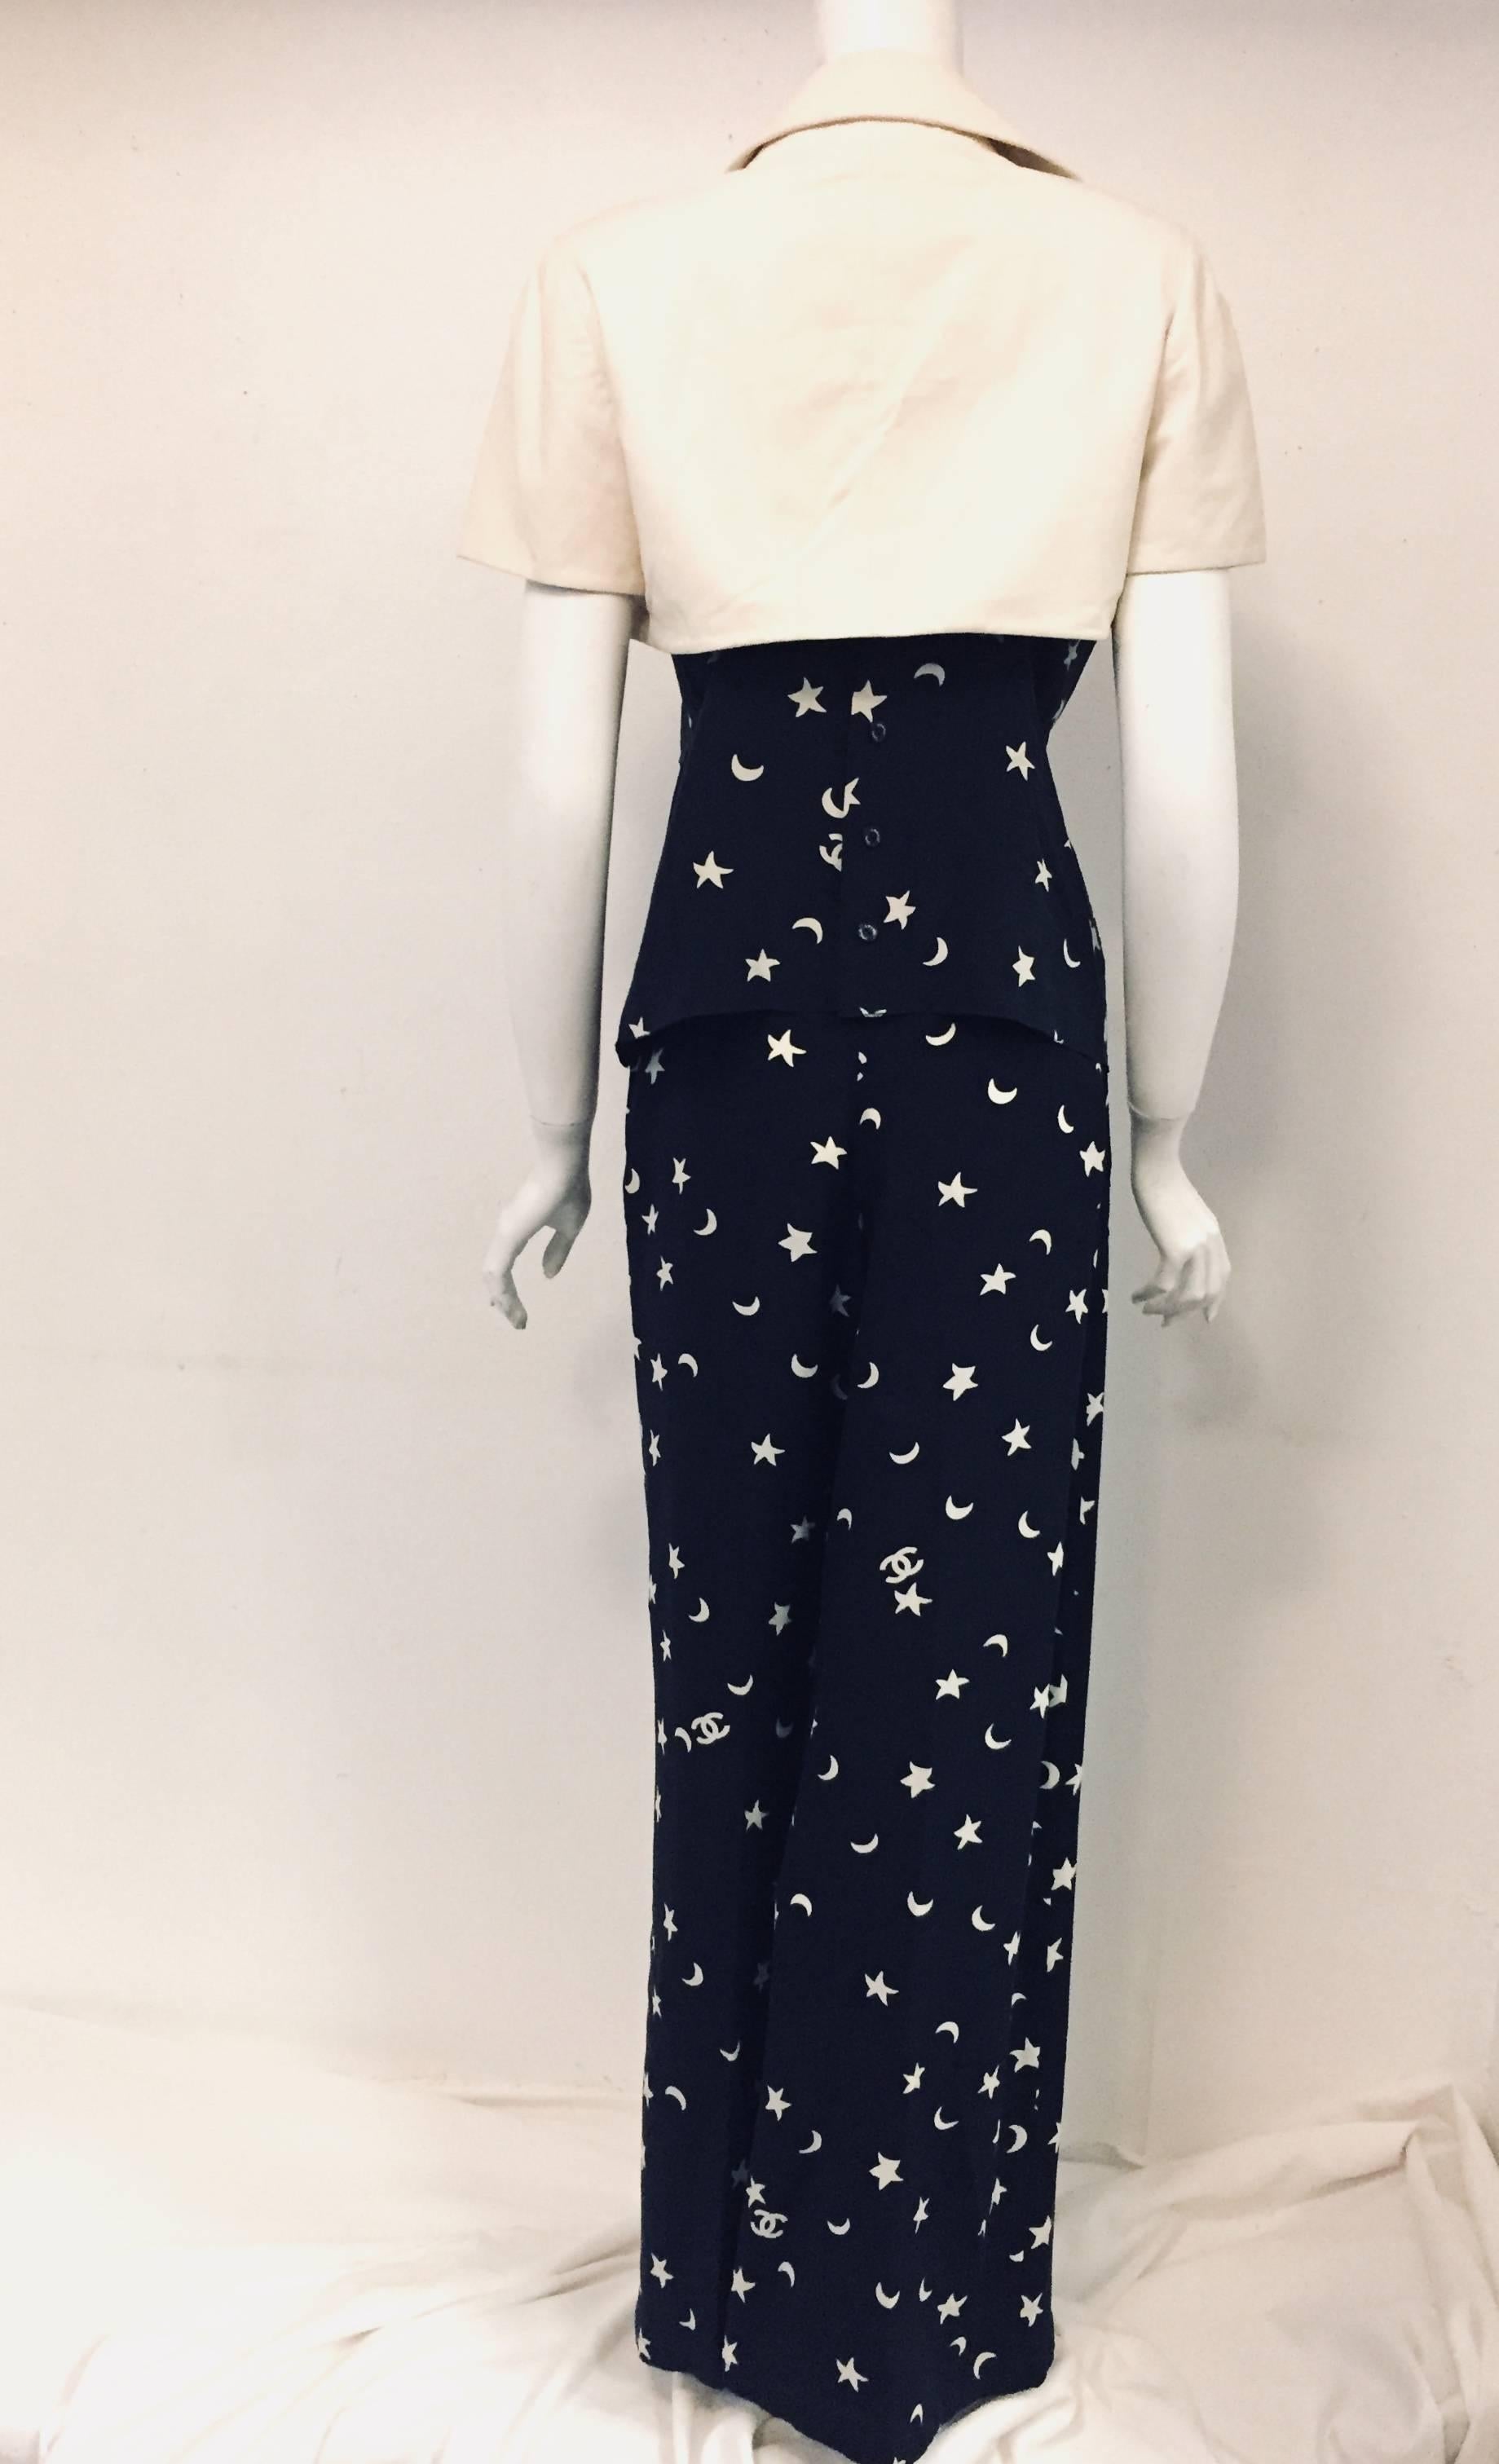  Celestial Chanel 4 Piece Stars & Moon Ensemble in Ivory and Navy Blue   1